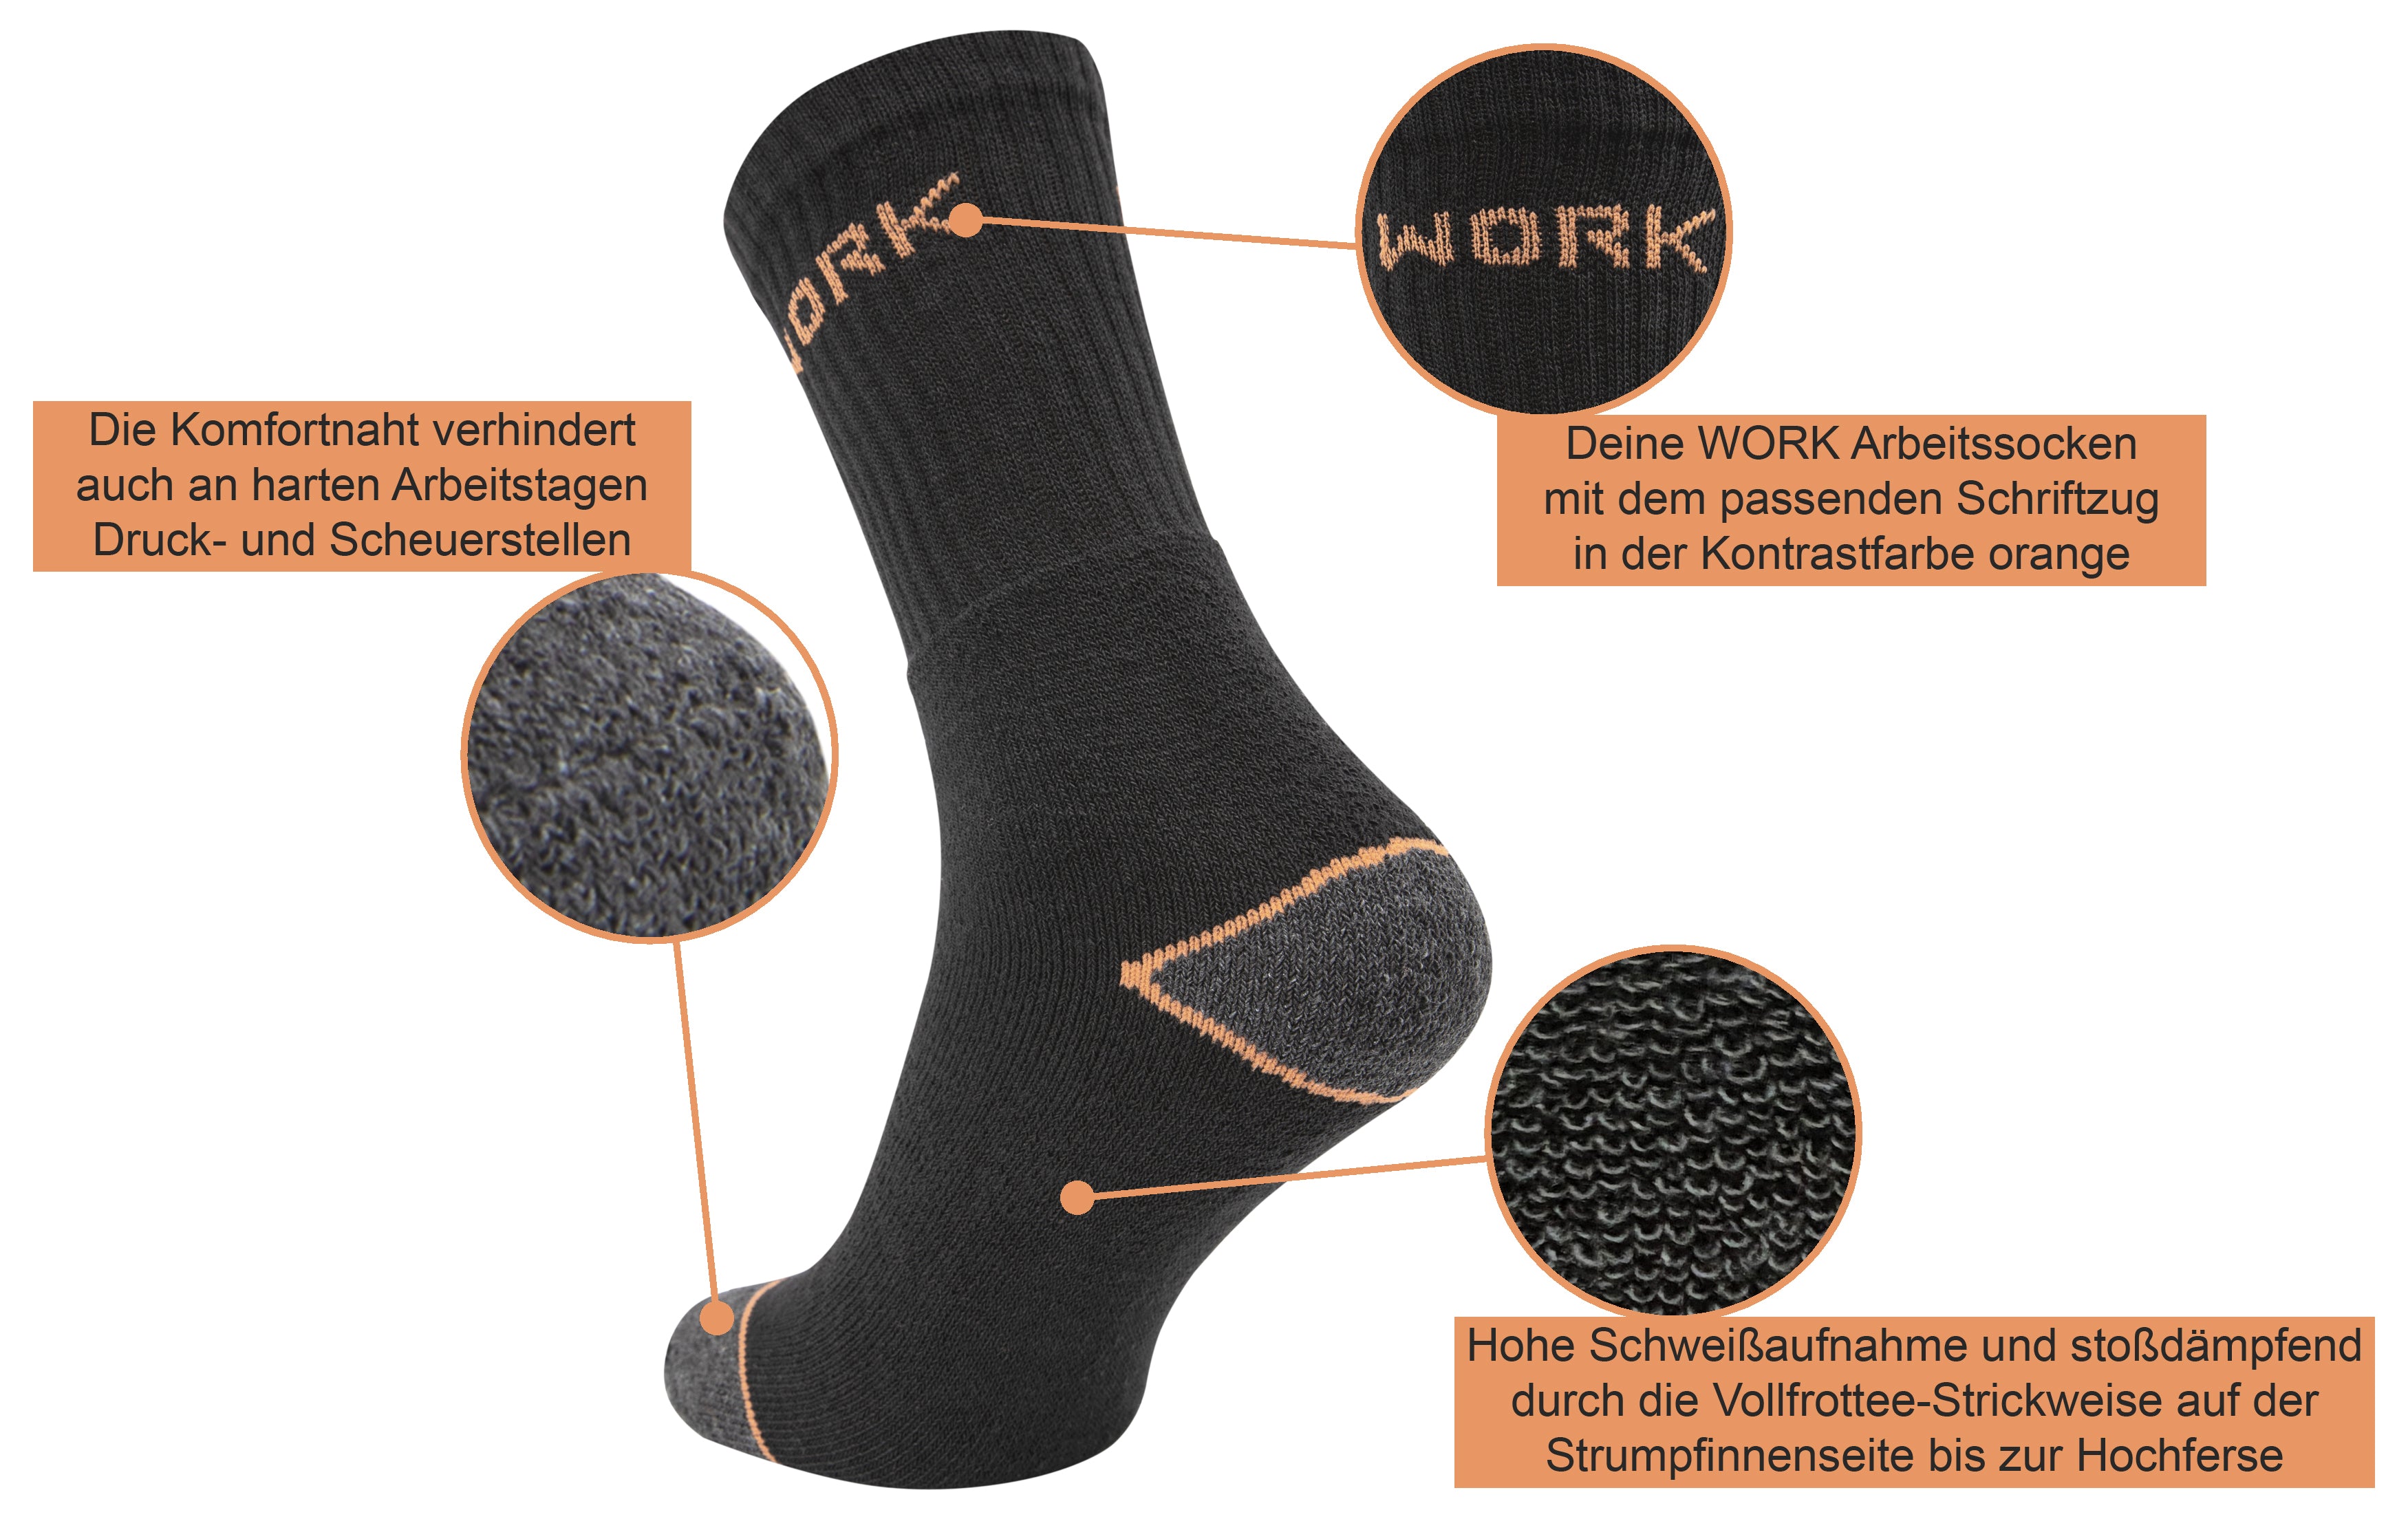 and 3/6/12/18 socks - sizes Paolo – pairs 36 Traumpreisfabrik 43/46 work or 39/42 Renzo®